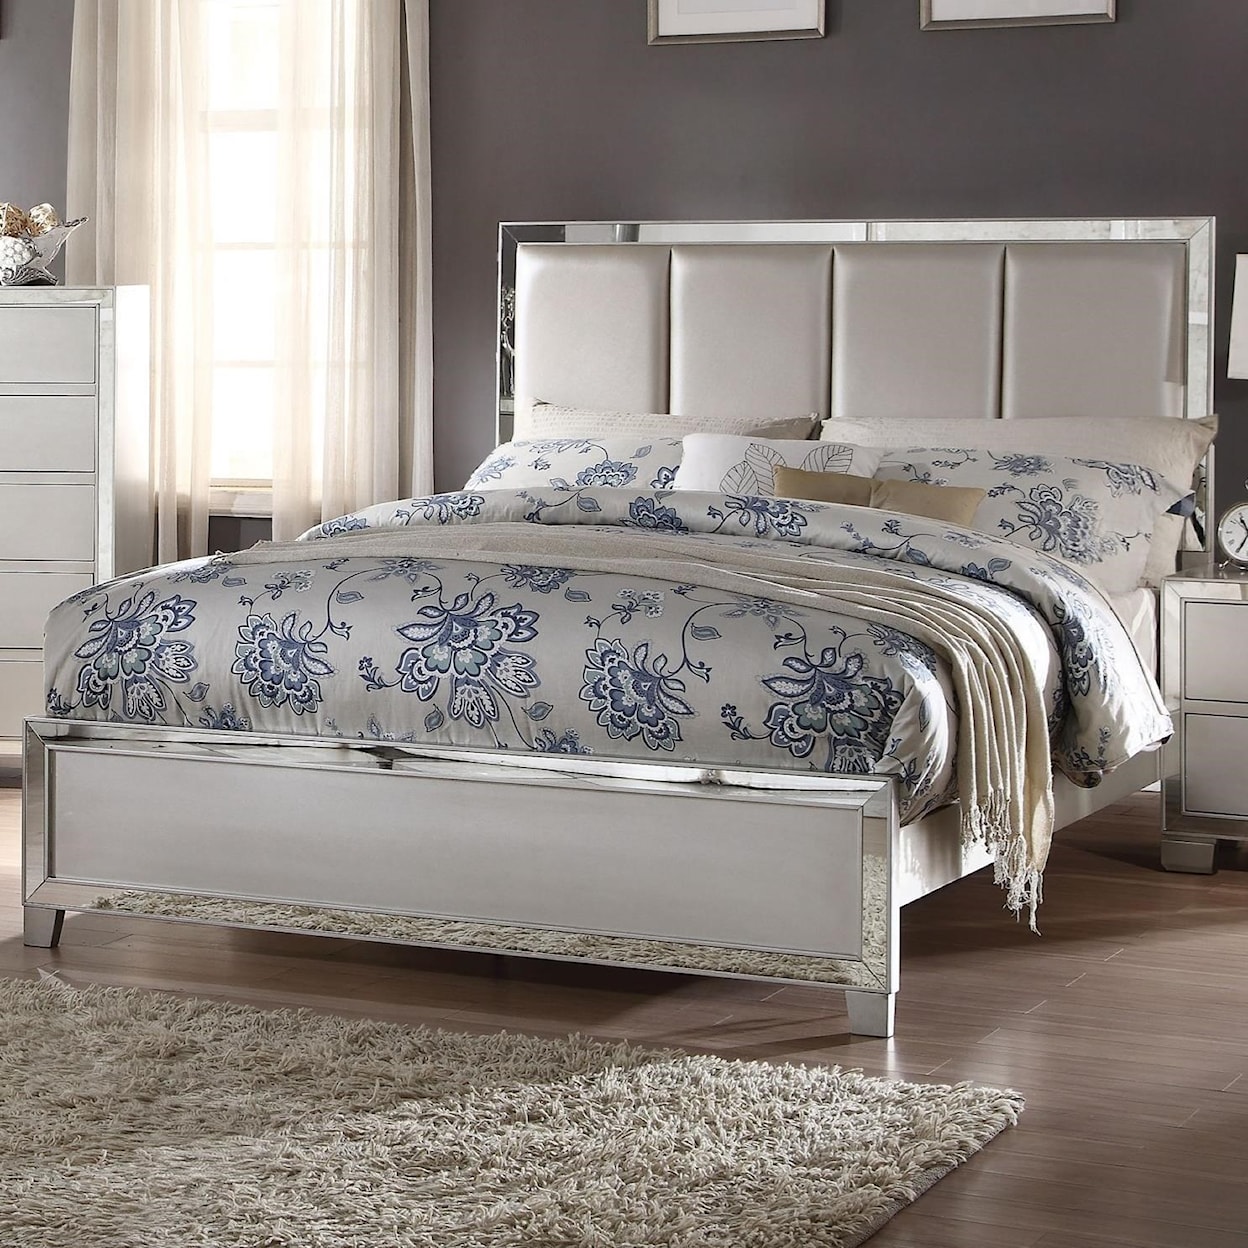 Acme Furniture Voeville II Queen Bed (Padded HB)